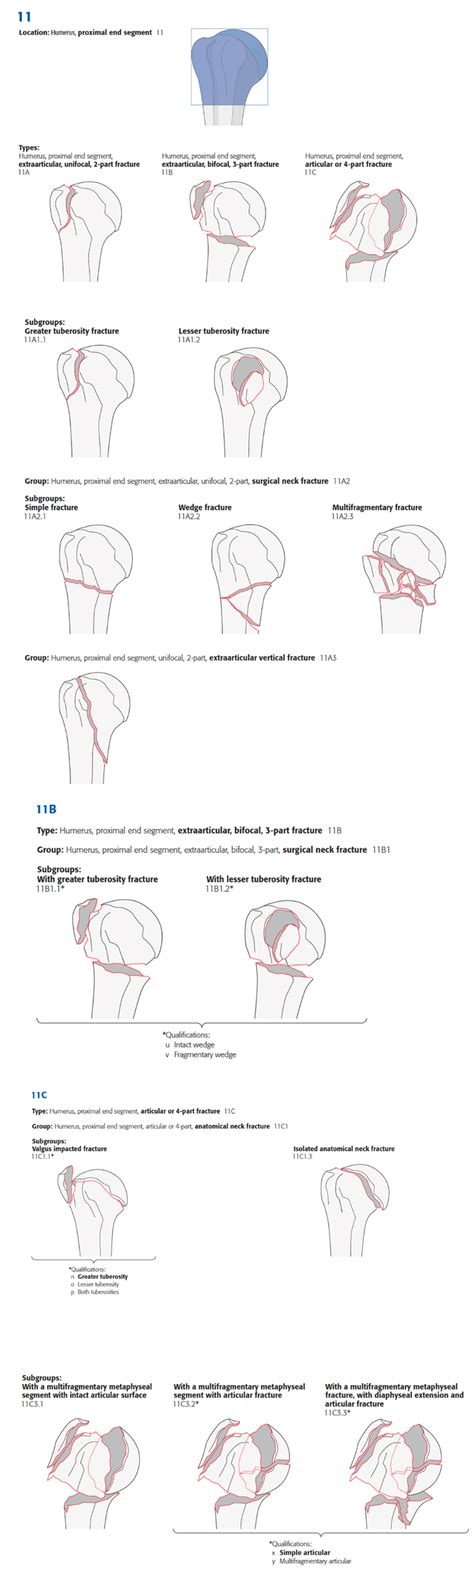 AO OTA Classification For Fractures Of The Proximal Humerus Obtained Download Scientific